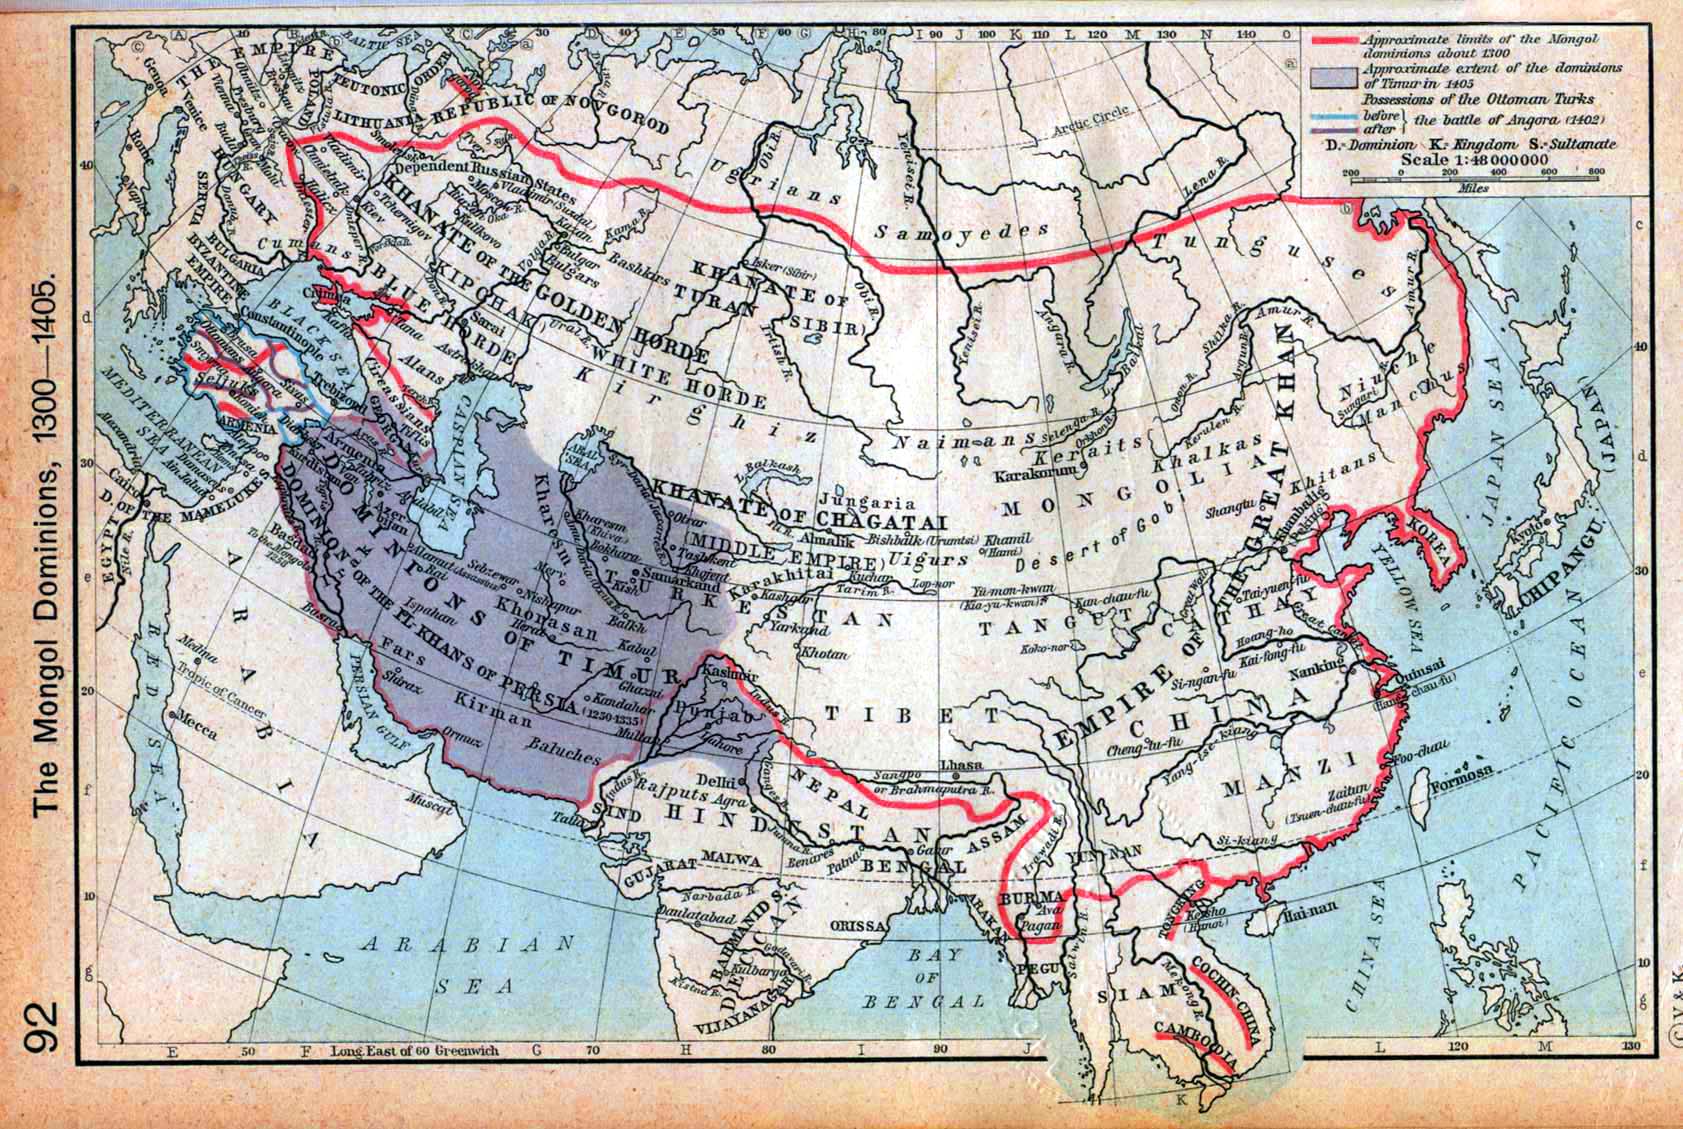 Map of the Mongol Dominions 1300-1405